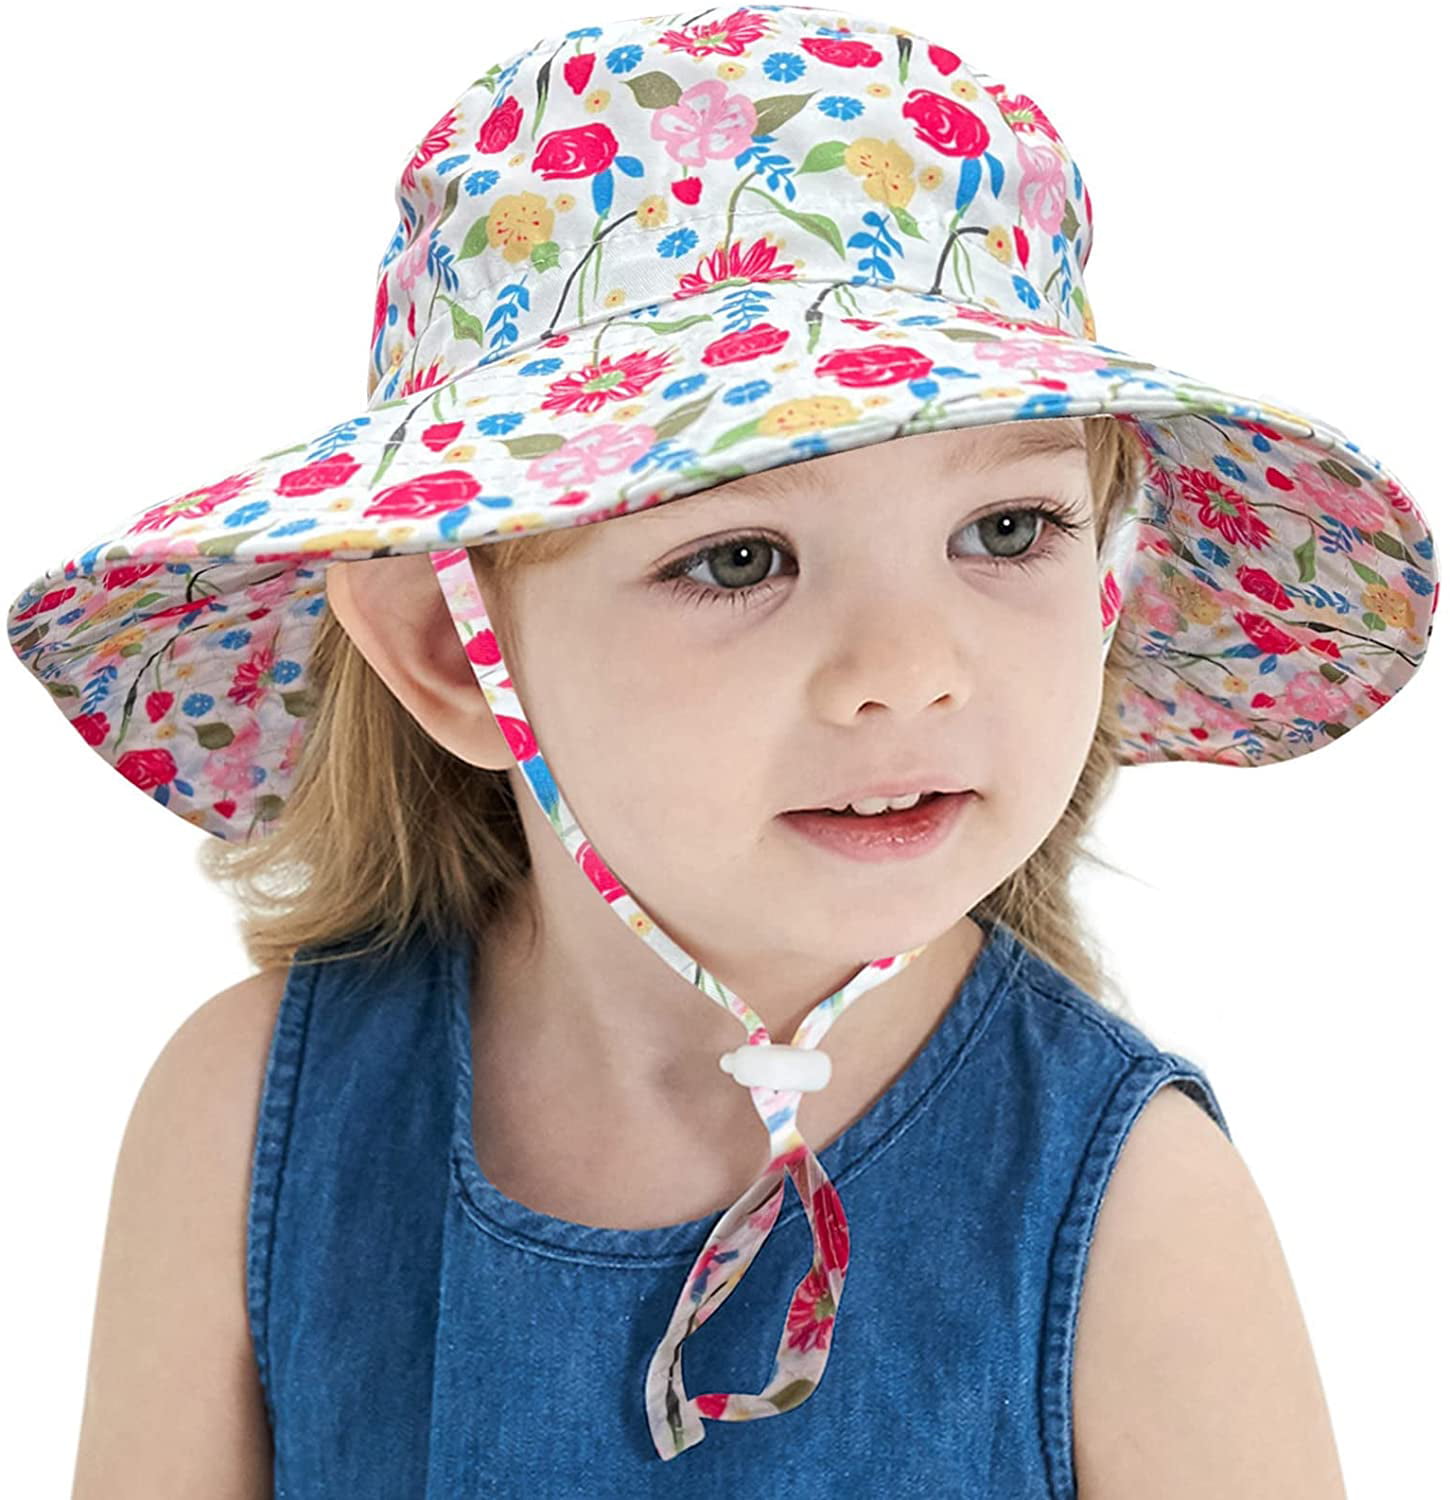 SHIELD CREATOR Baby Sun Hat 6M-8Y Girls Boys Bucket Hat with Wide Brim Toddler Sun Protection Hat 